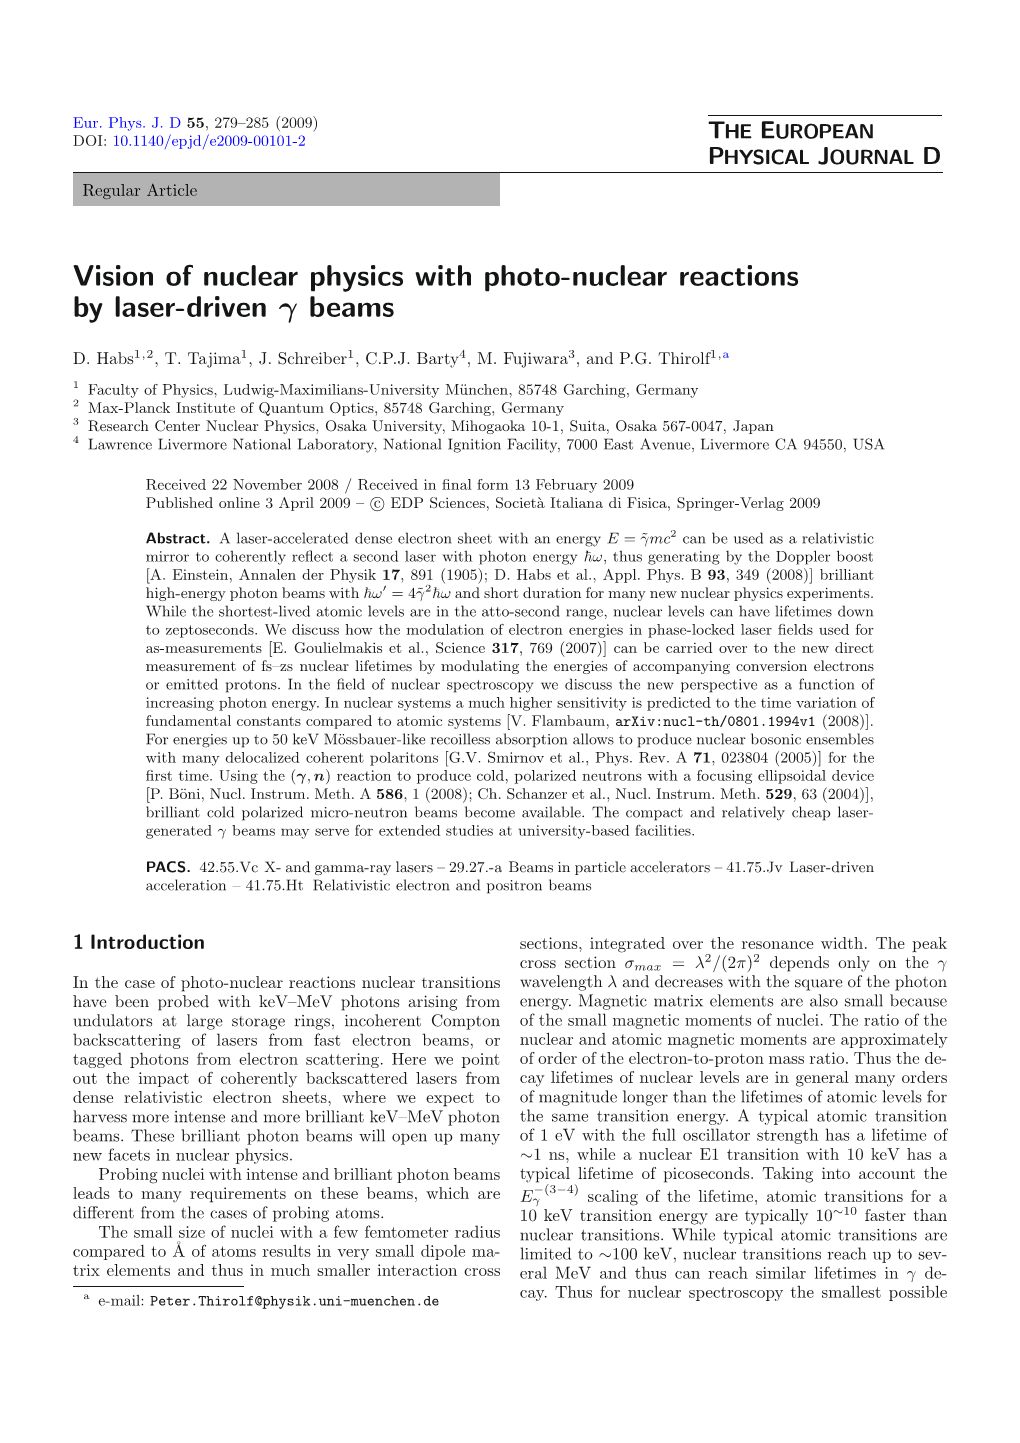 Vision of Nuclear Physics with Photo-Nuclear Reactions by Laser-Driven Γ Beams